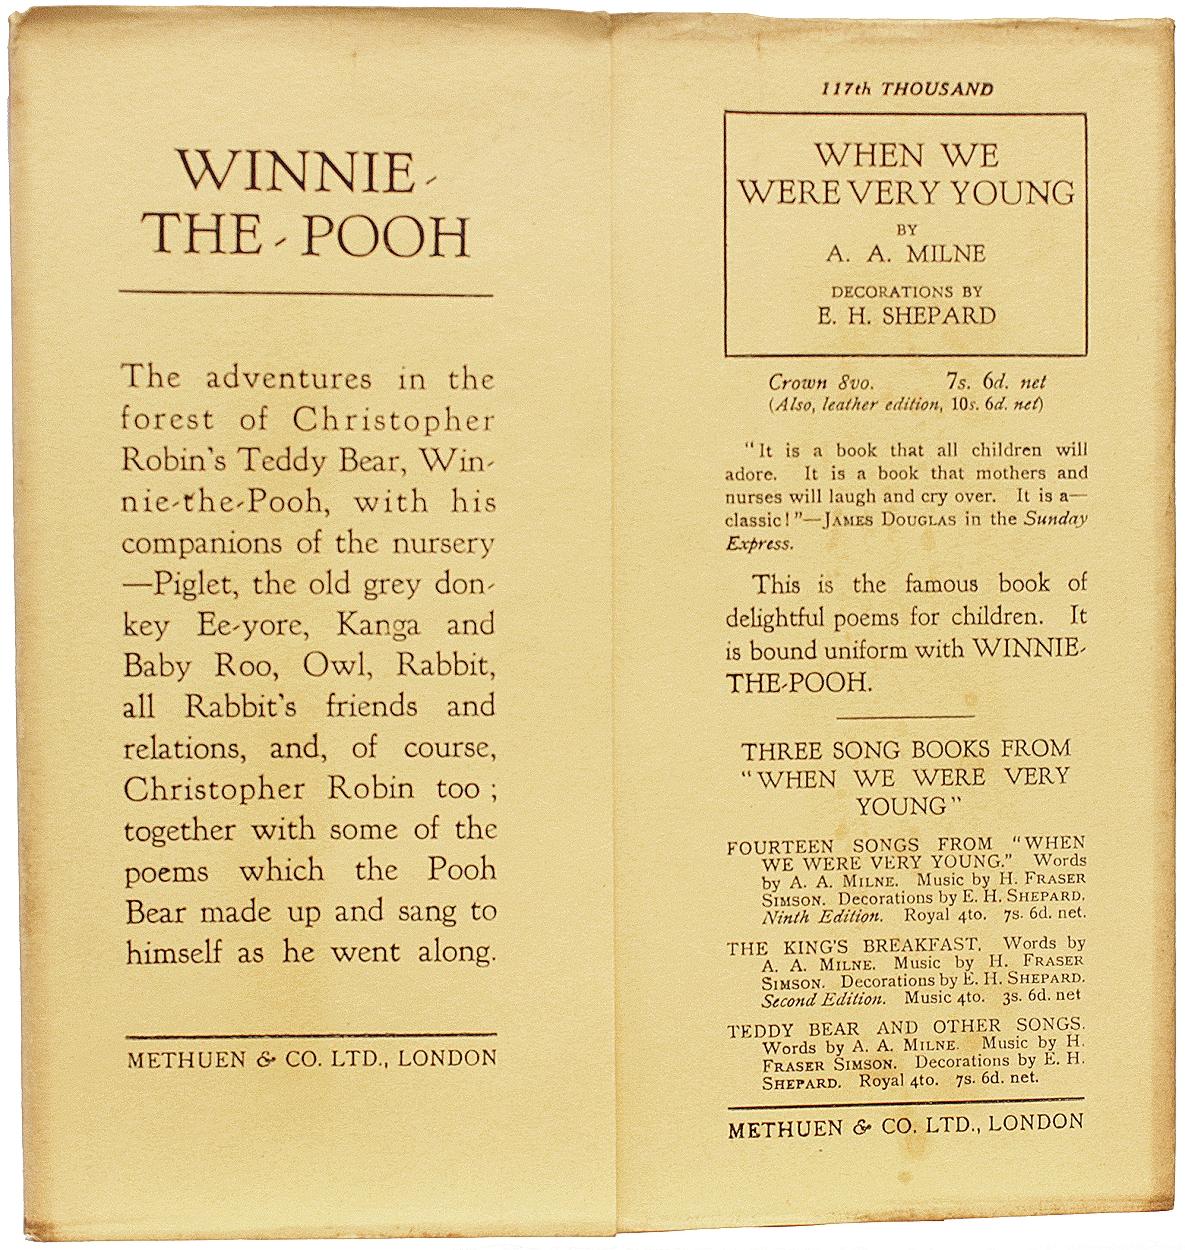 British A. A. Milne - Winnie The Pooh - 1926 - FIRST EDITION FIRST PRINTING WITH THE DJ